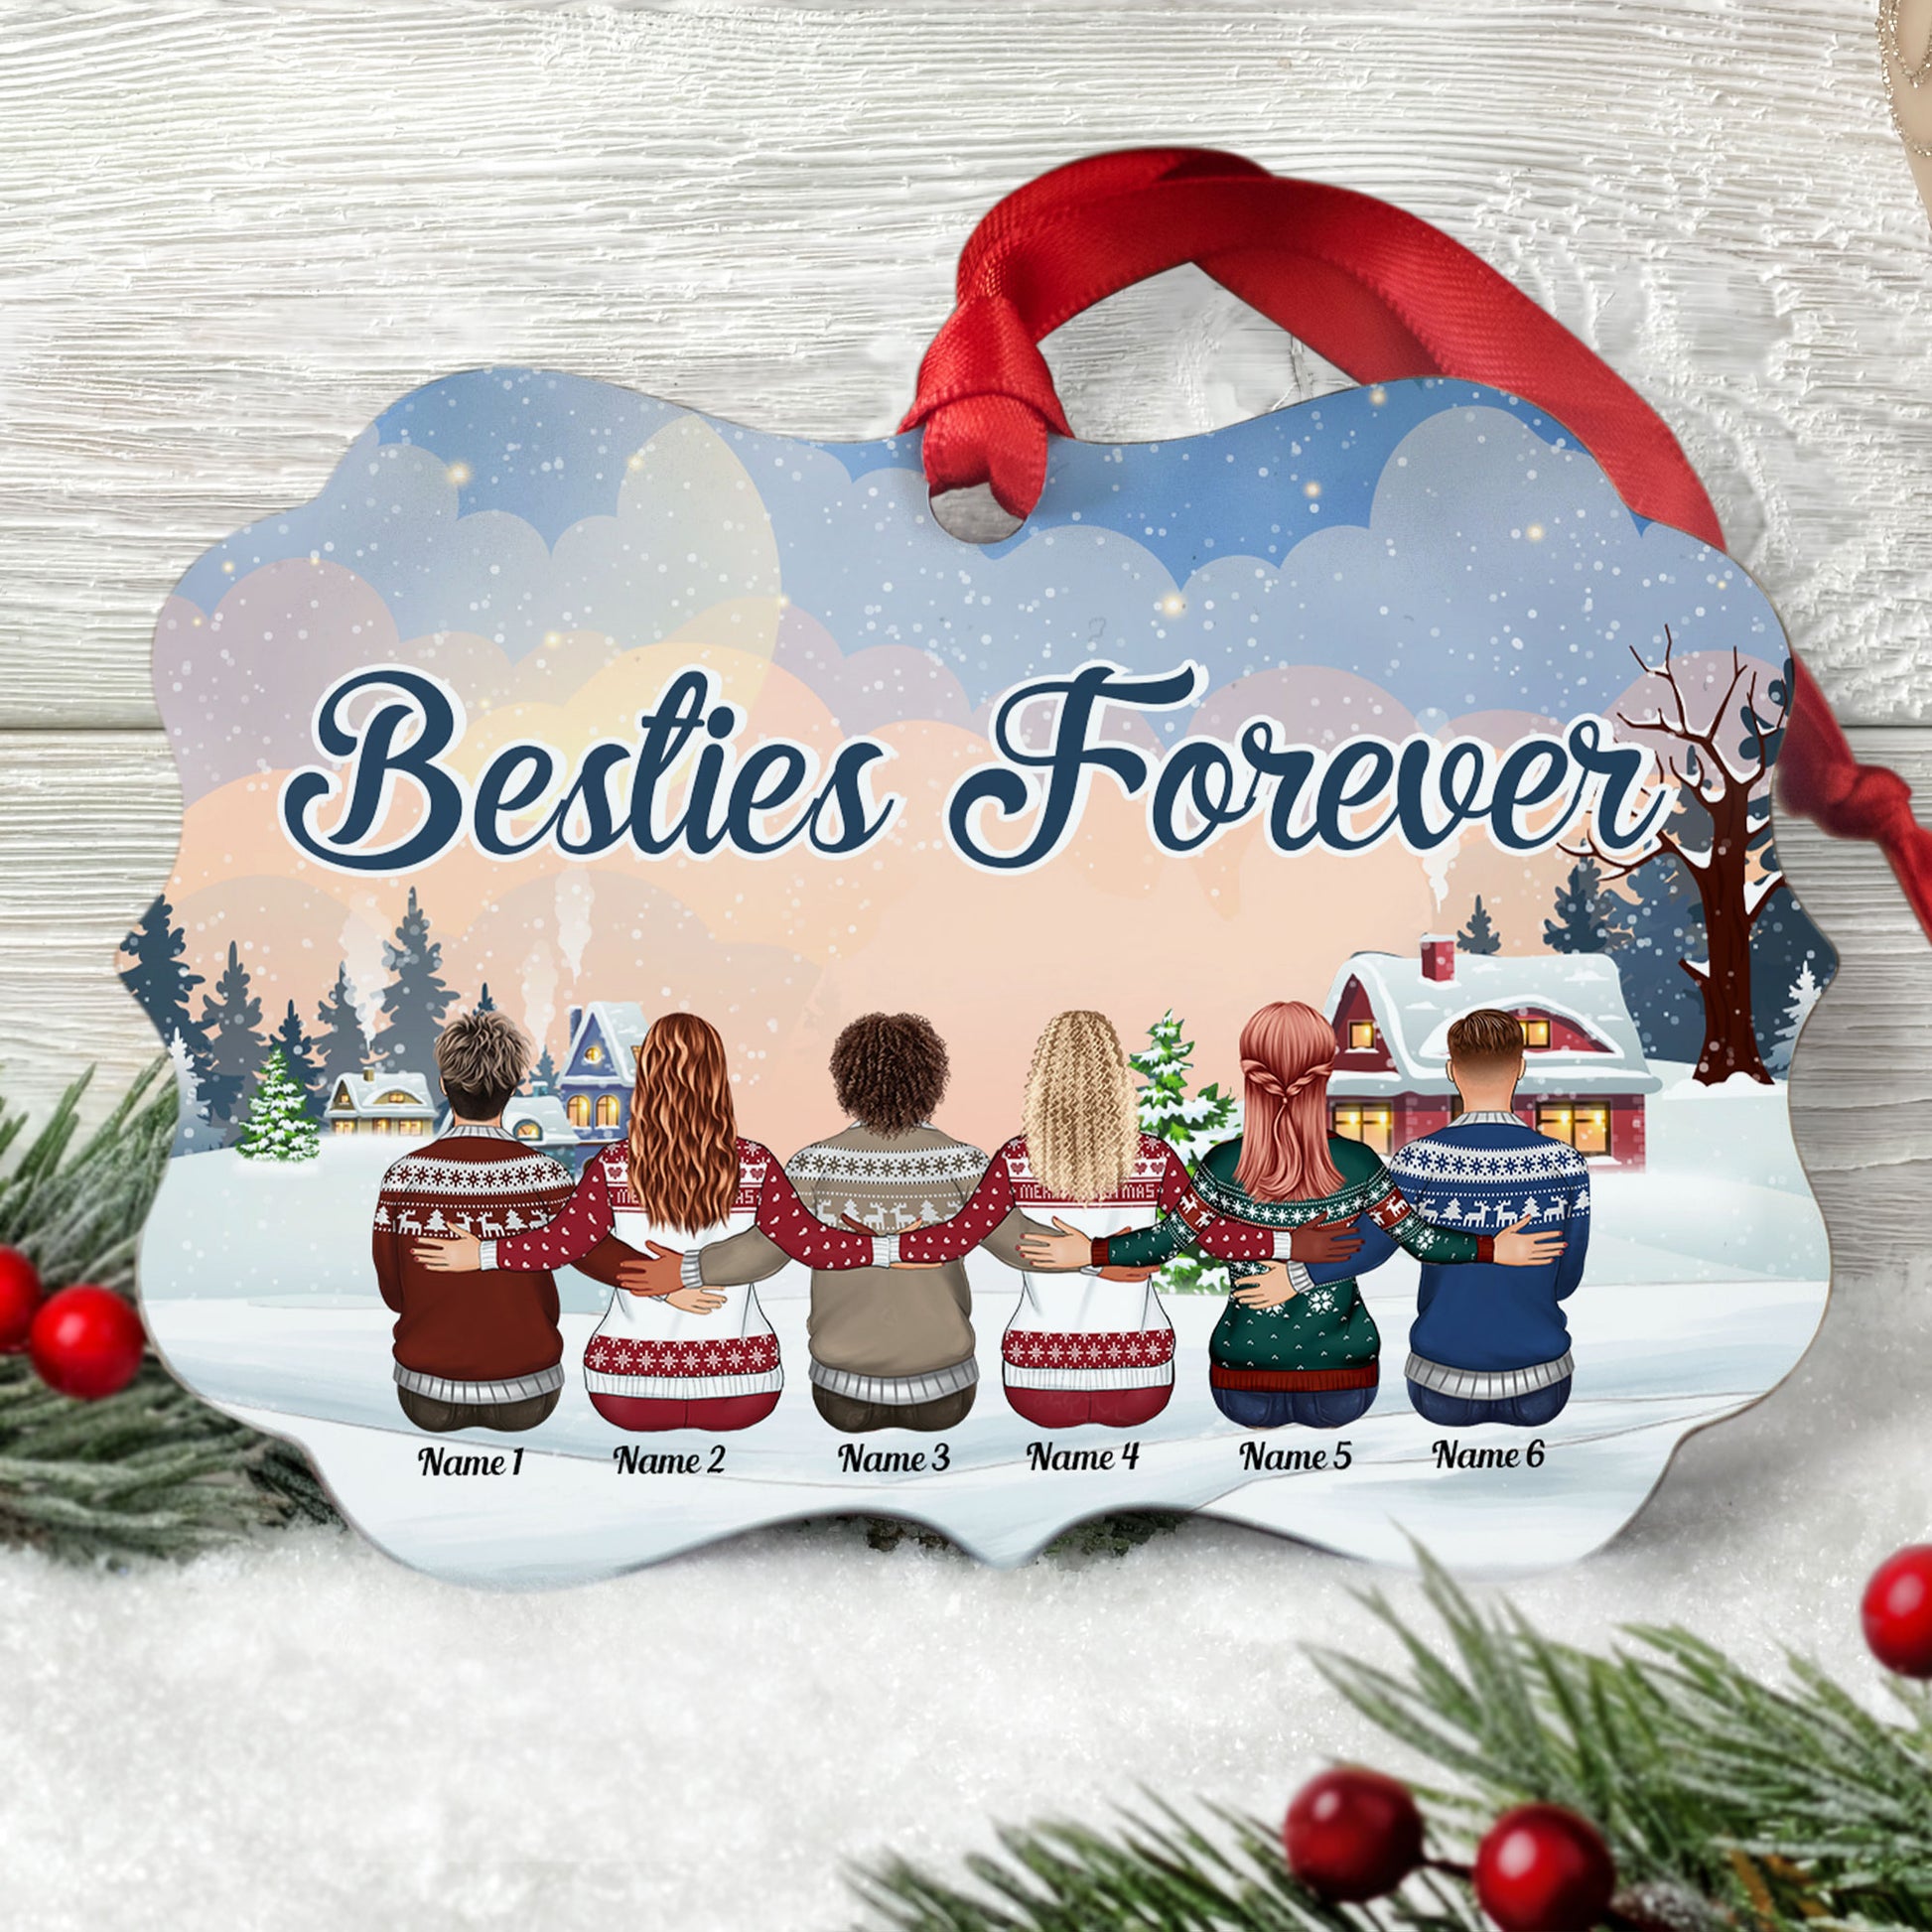 Besties Forever - Personalized Aluminum Ornament - Christmas Gift Friends Ornament For Besties - Family Hugging